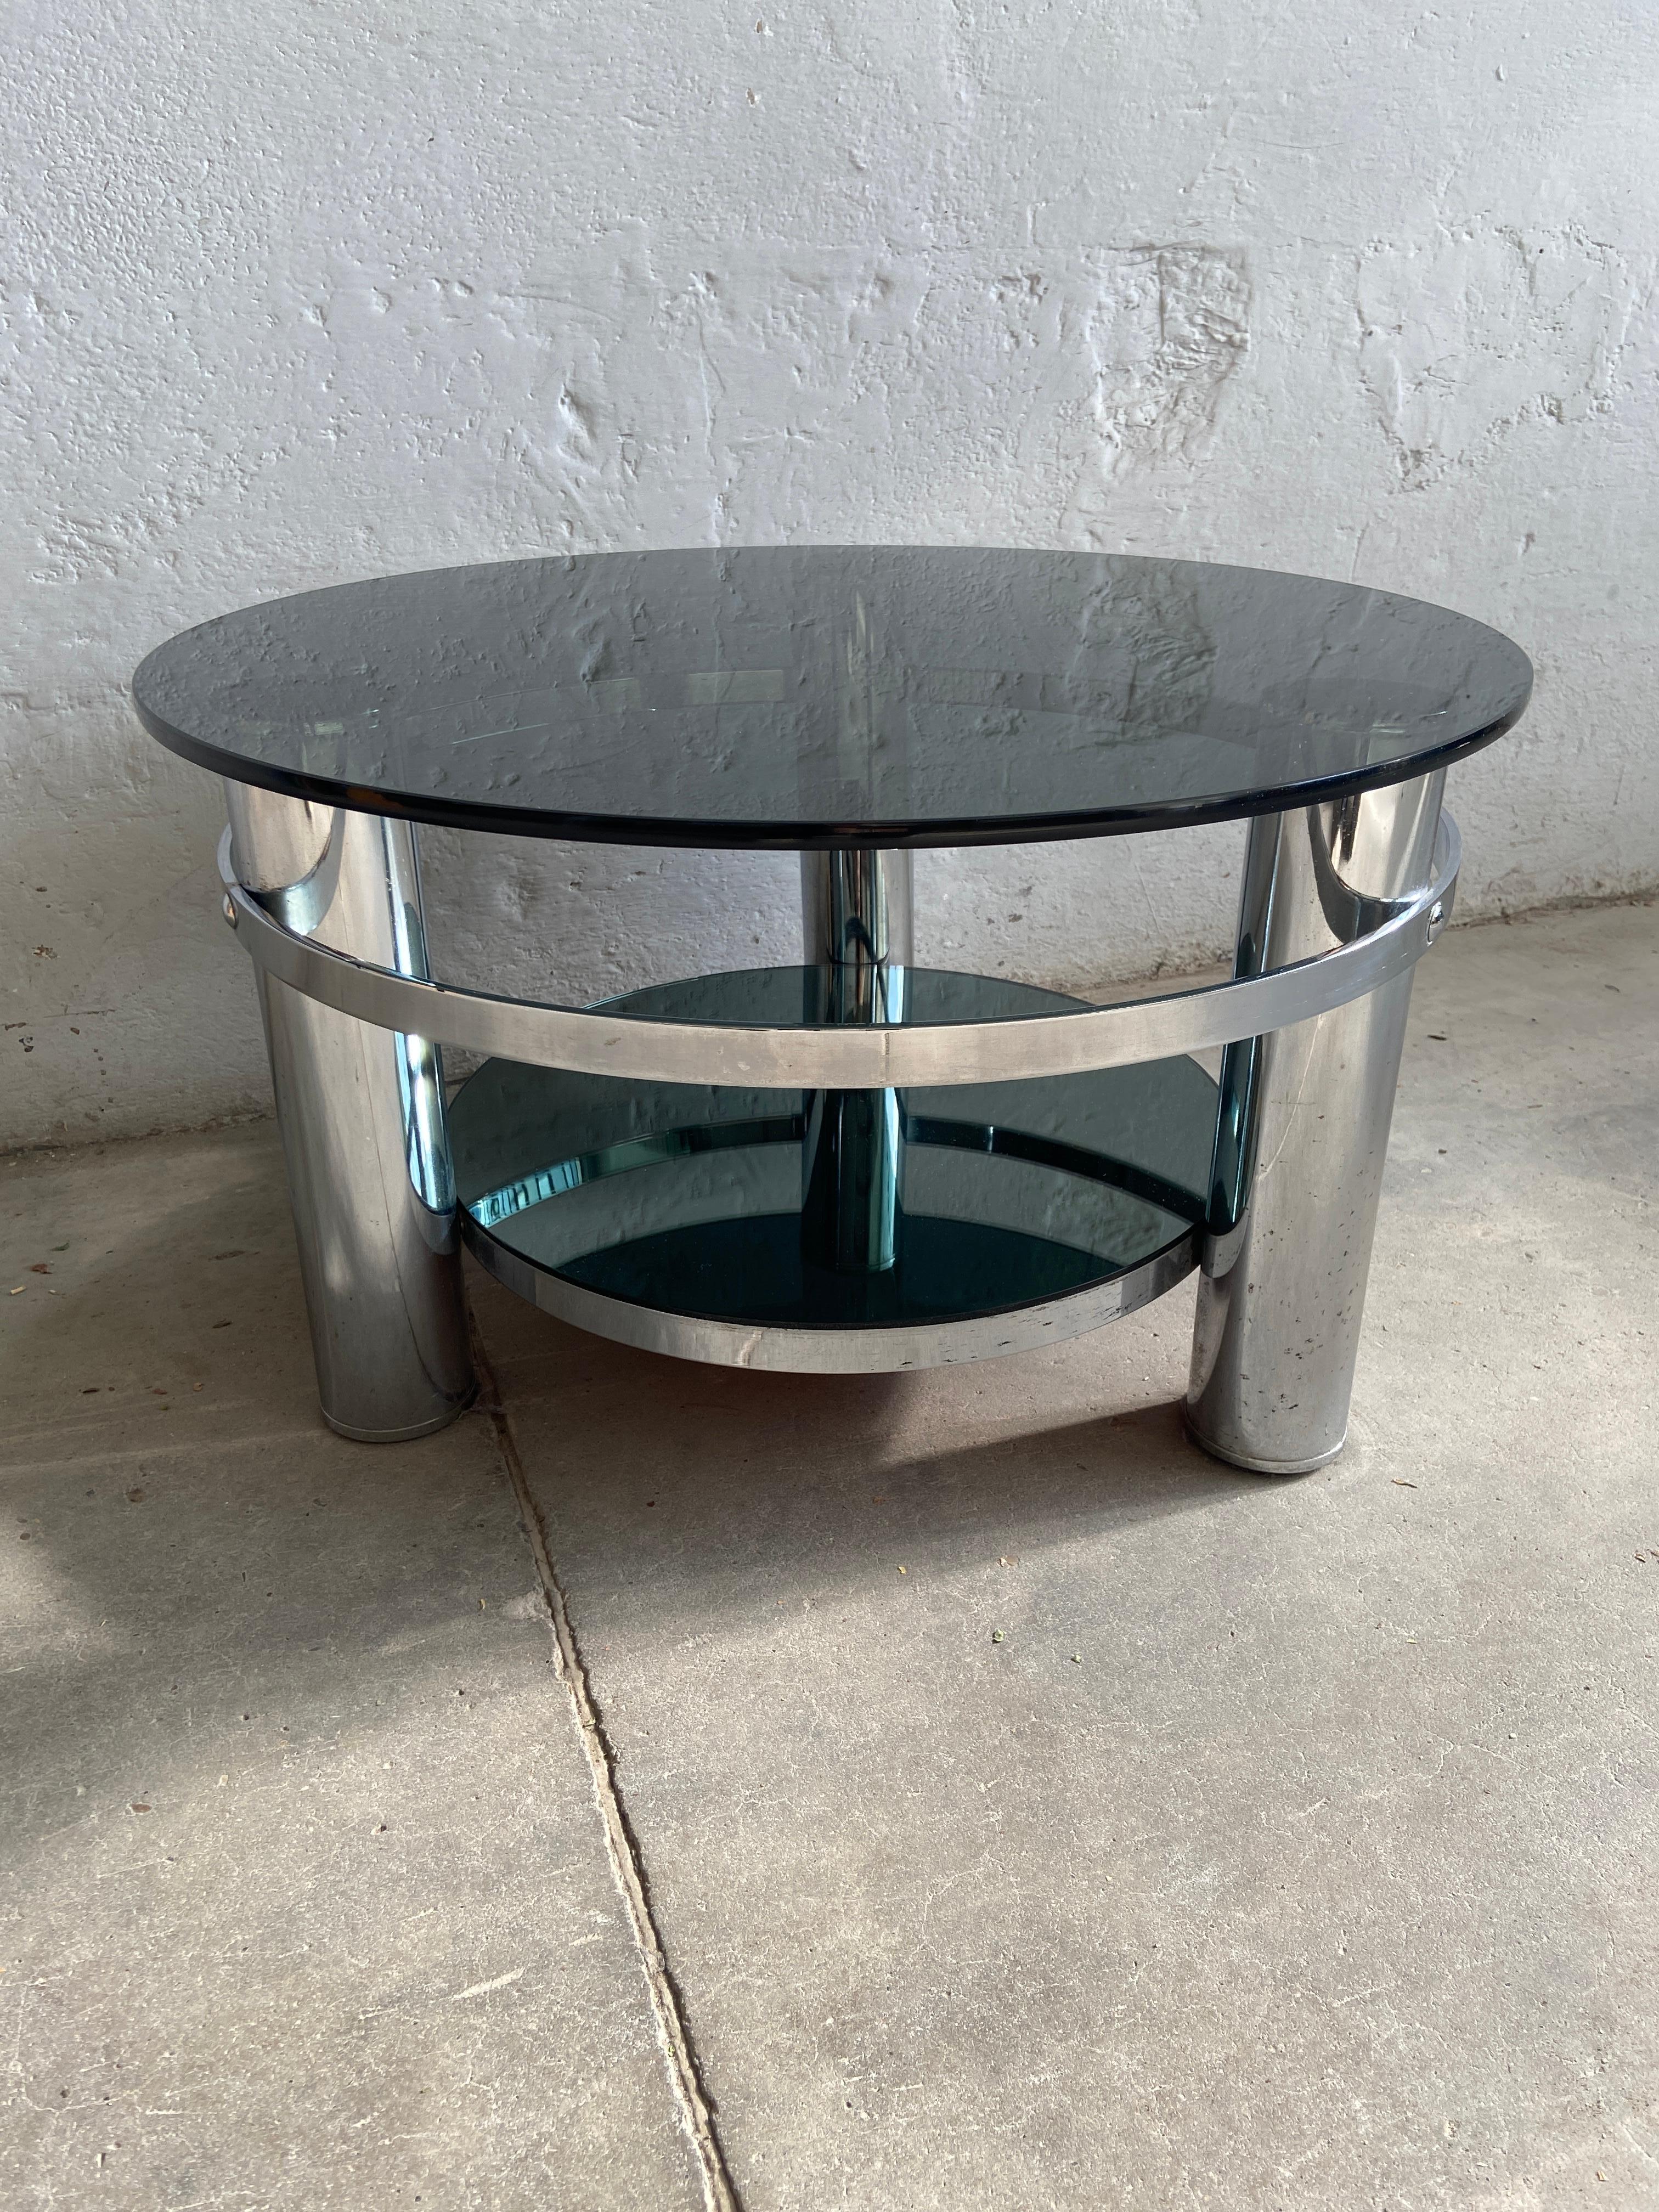 Mid-Century Modern Italian round chrome coffee table with smoked glass top and mirrored low level shelf.
The smoked glass top presents a little scratch but overall the table is in really good vintage condition.